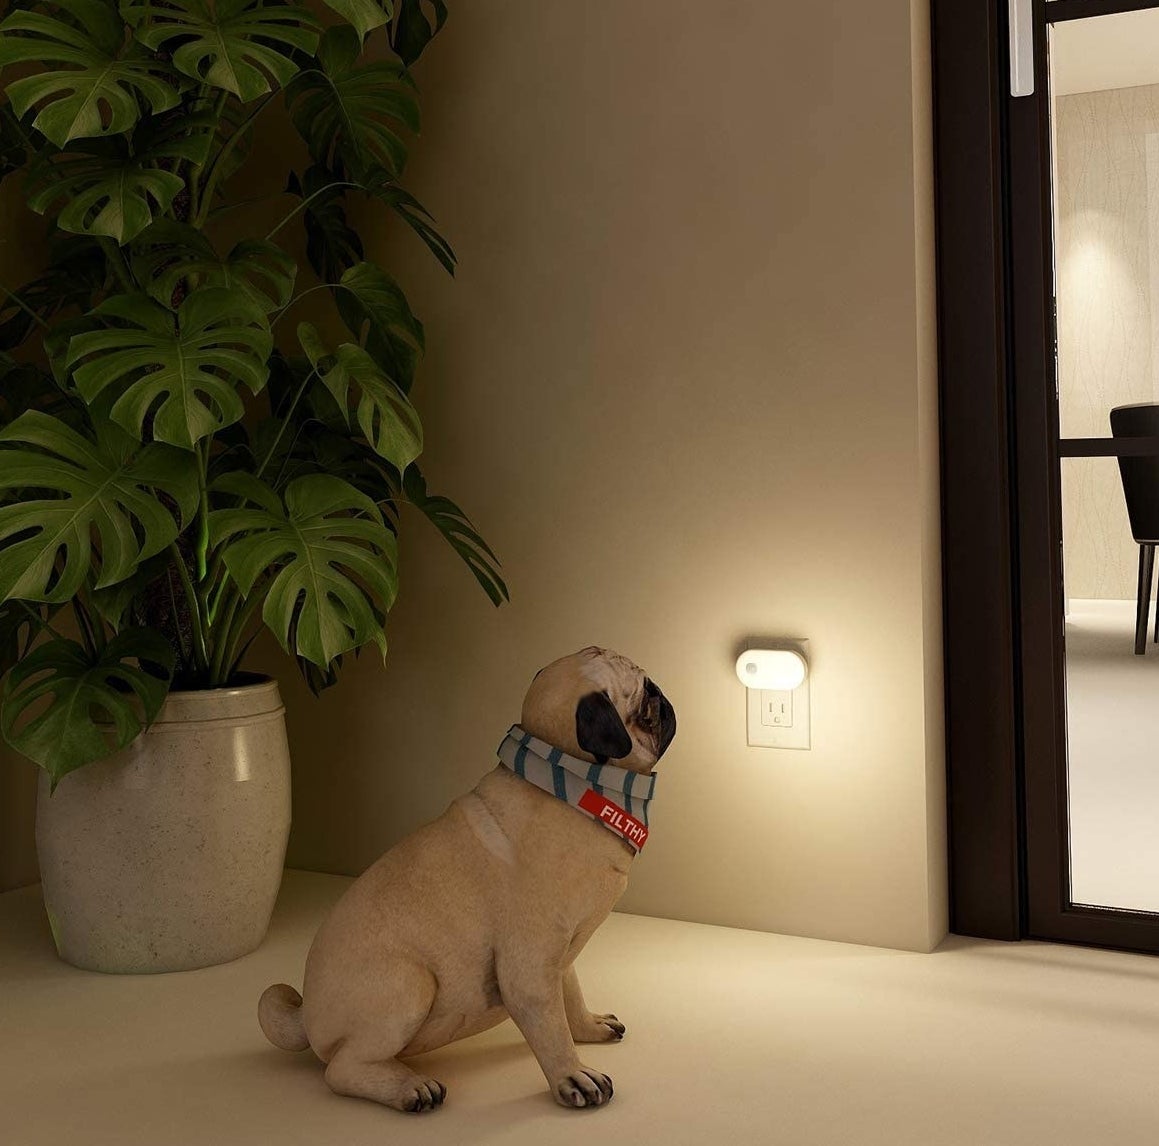 a dog looking at a motion sensor night light in a dimly lit room